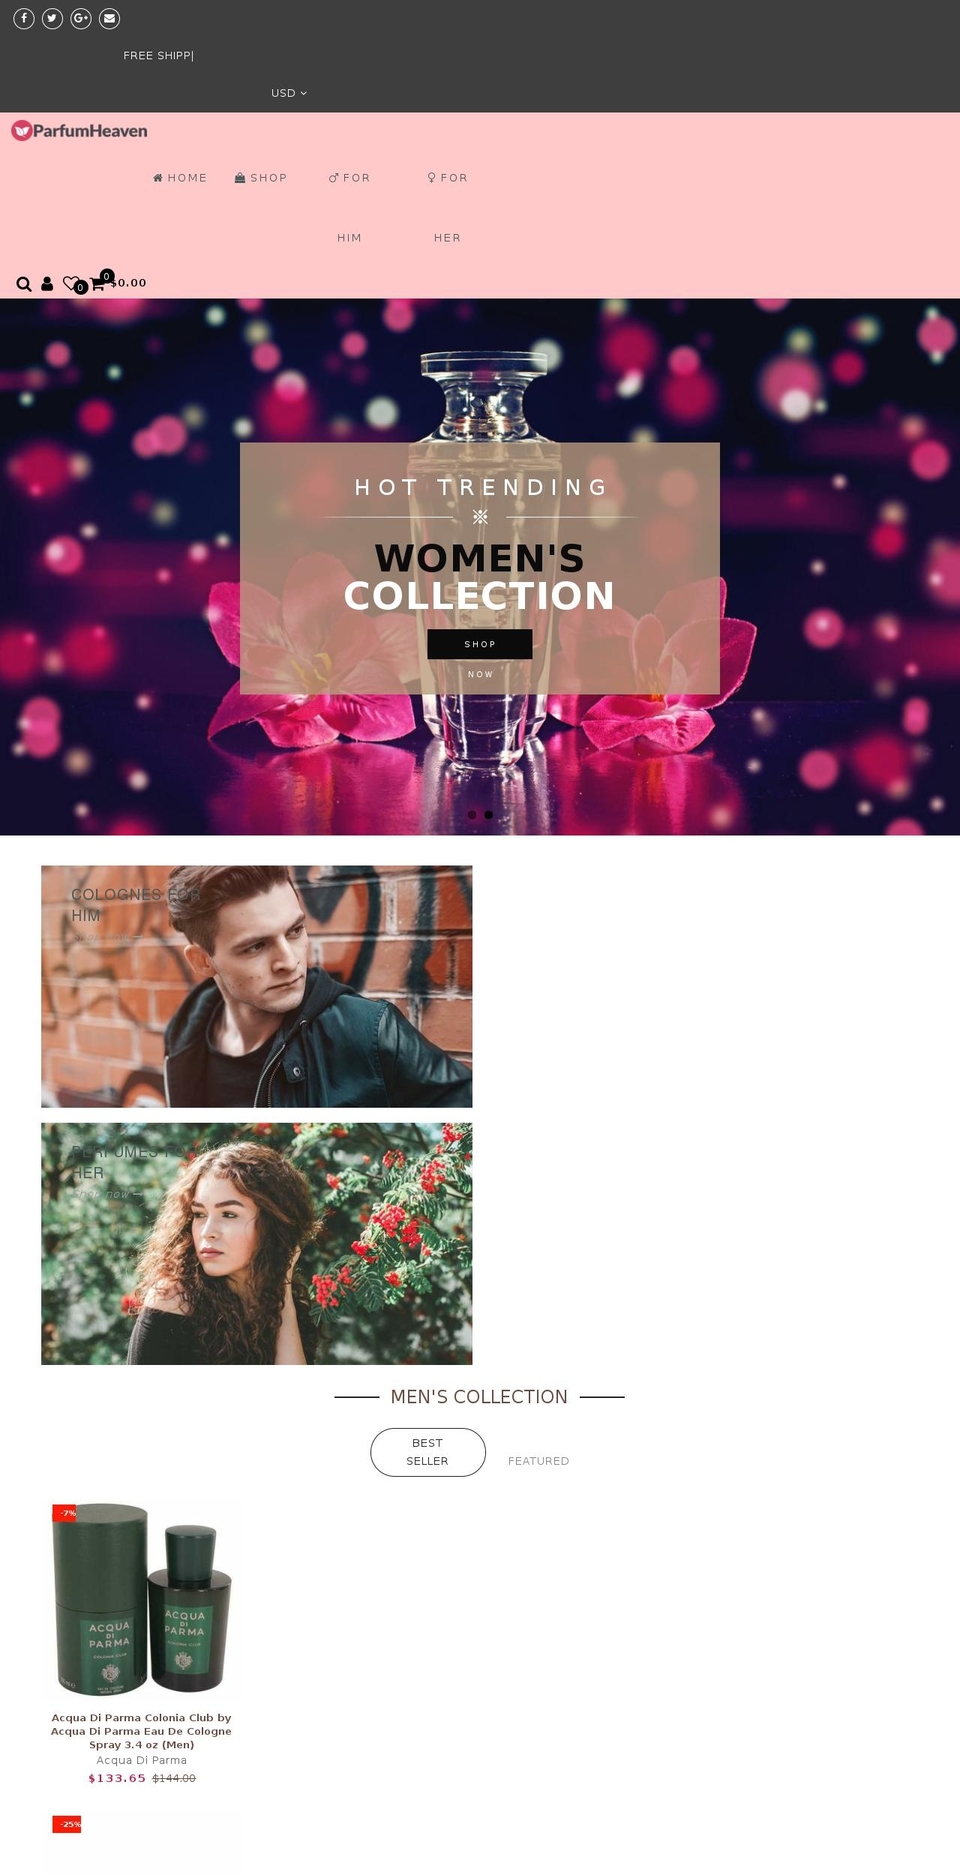 gecko-1-3-2-upload Shopify theme site example parfumheaven.com